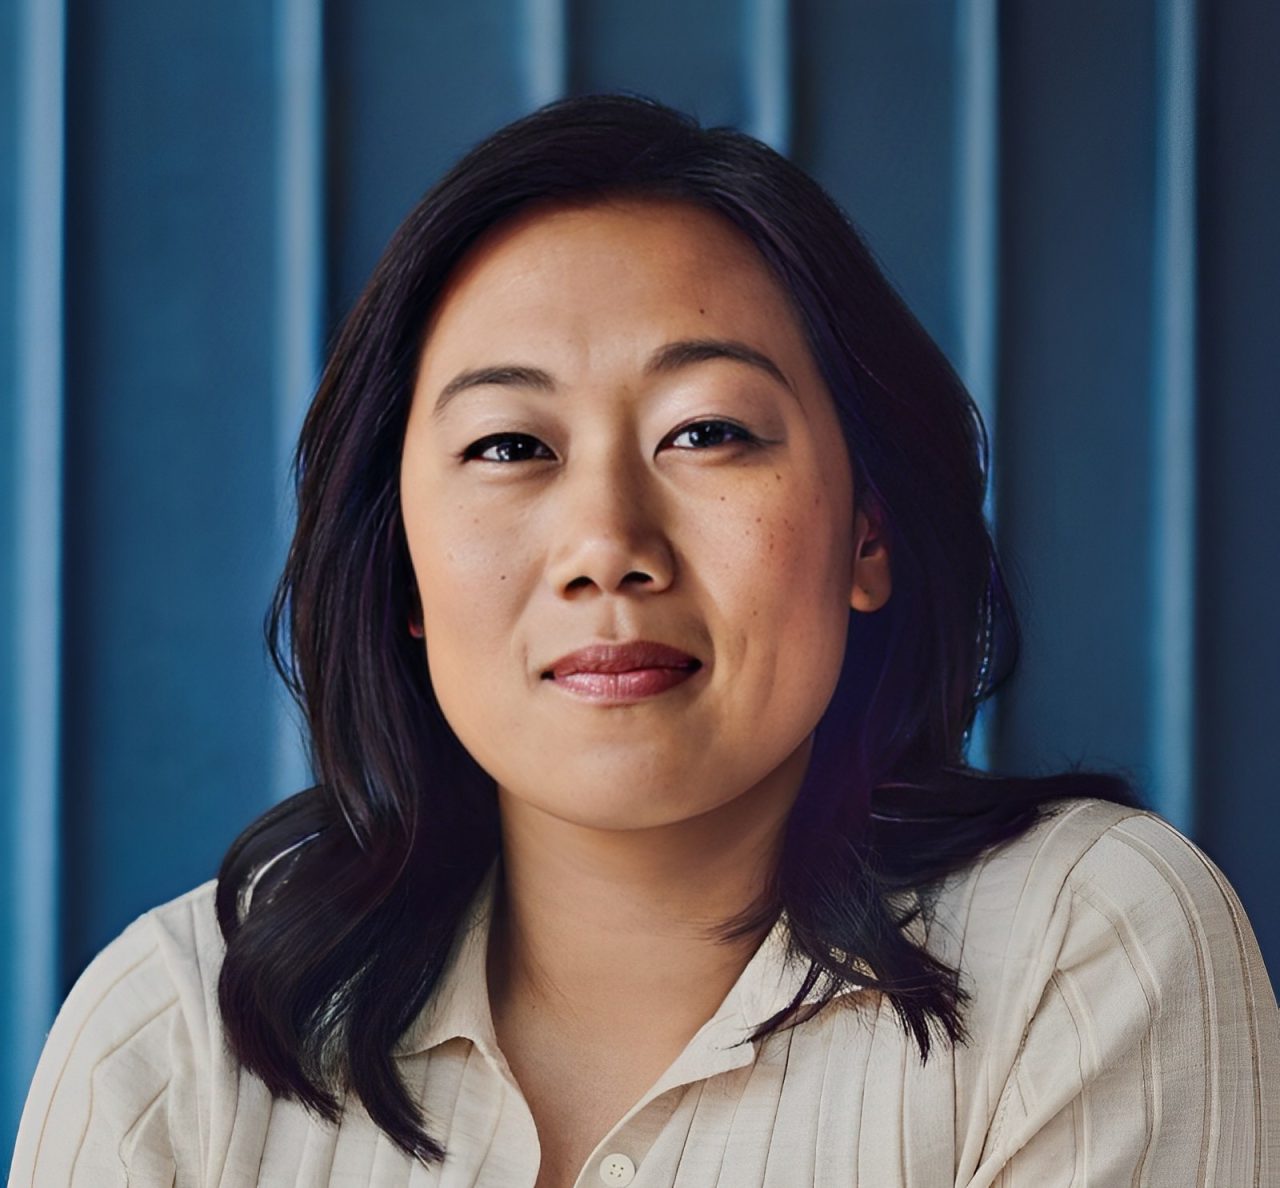 Priscilla Chan: Big scientific breakthroughs in human biology that come from studying rare diseases